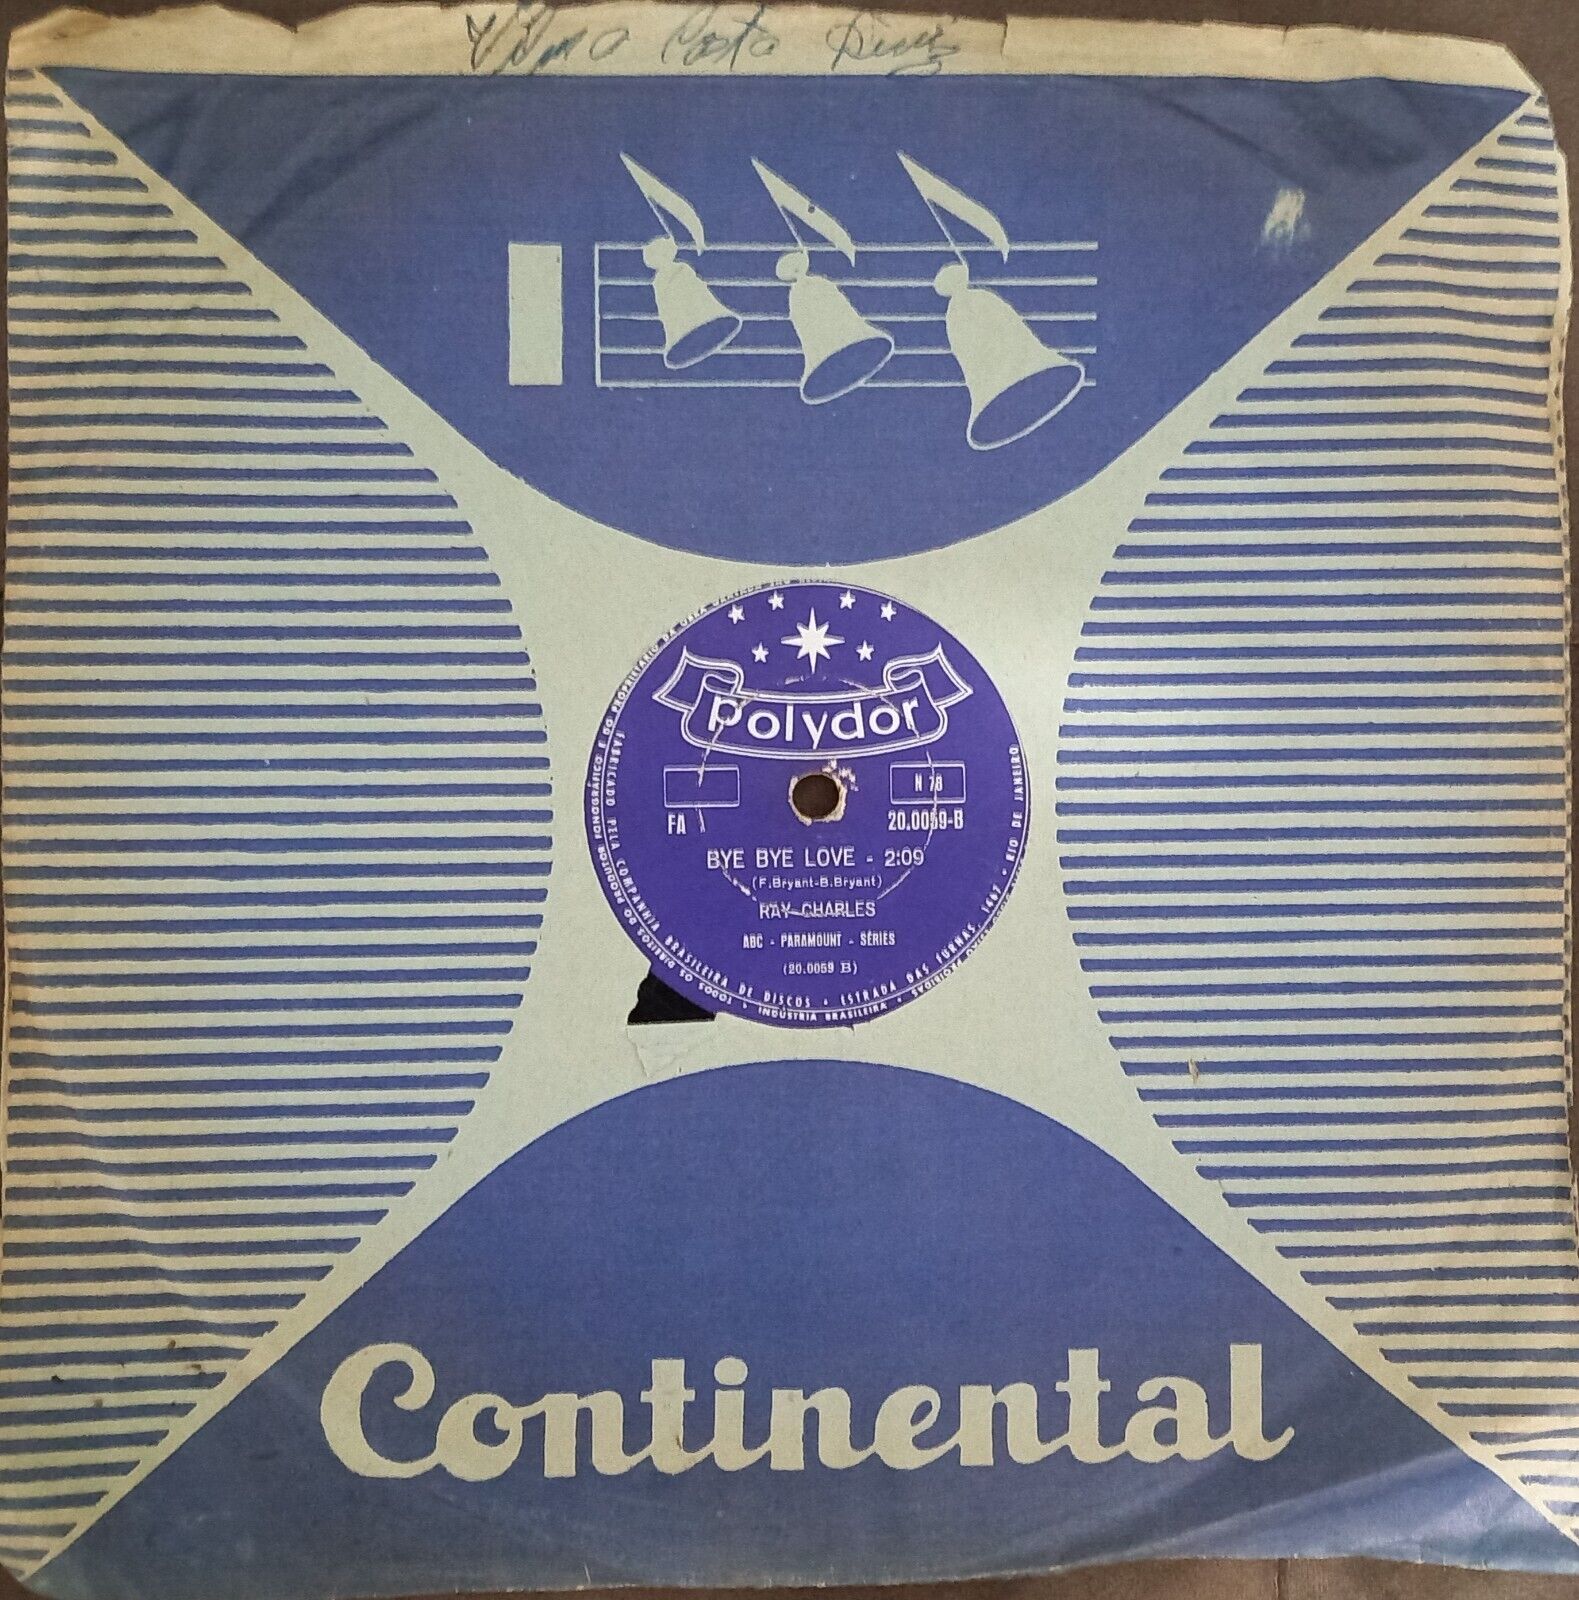 10" RAY CHARLES 78 RPM "I CAN'T STOP LOVING YOU" + "BYE BYE LOVE" BRAZIL 1962 VG